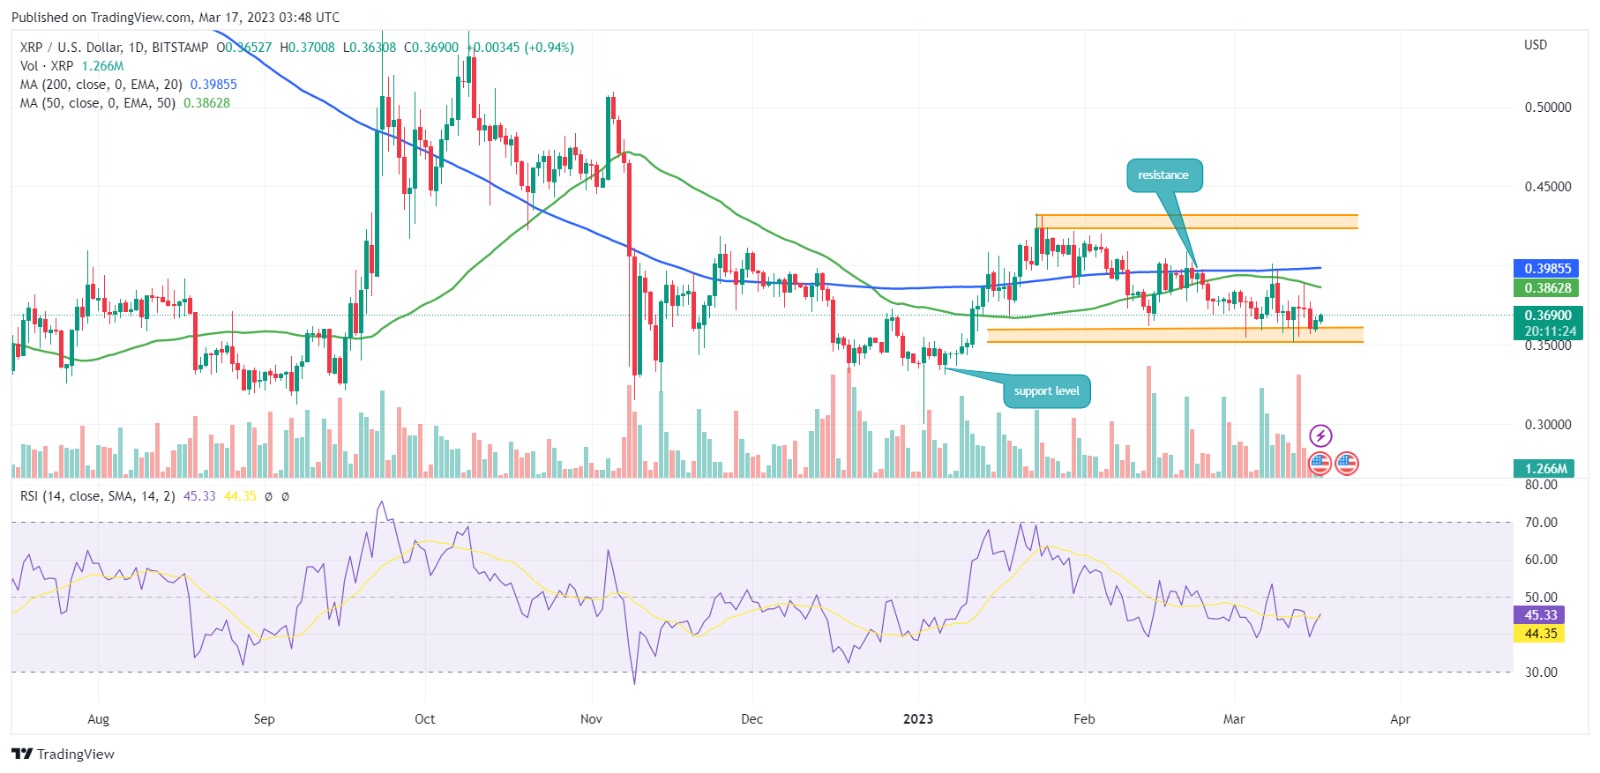 XRP/USD Daily Chart according to trading view on 17/03/2023